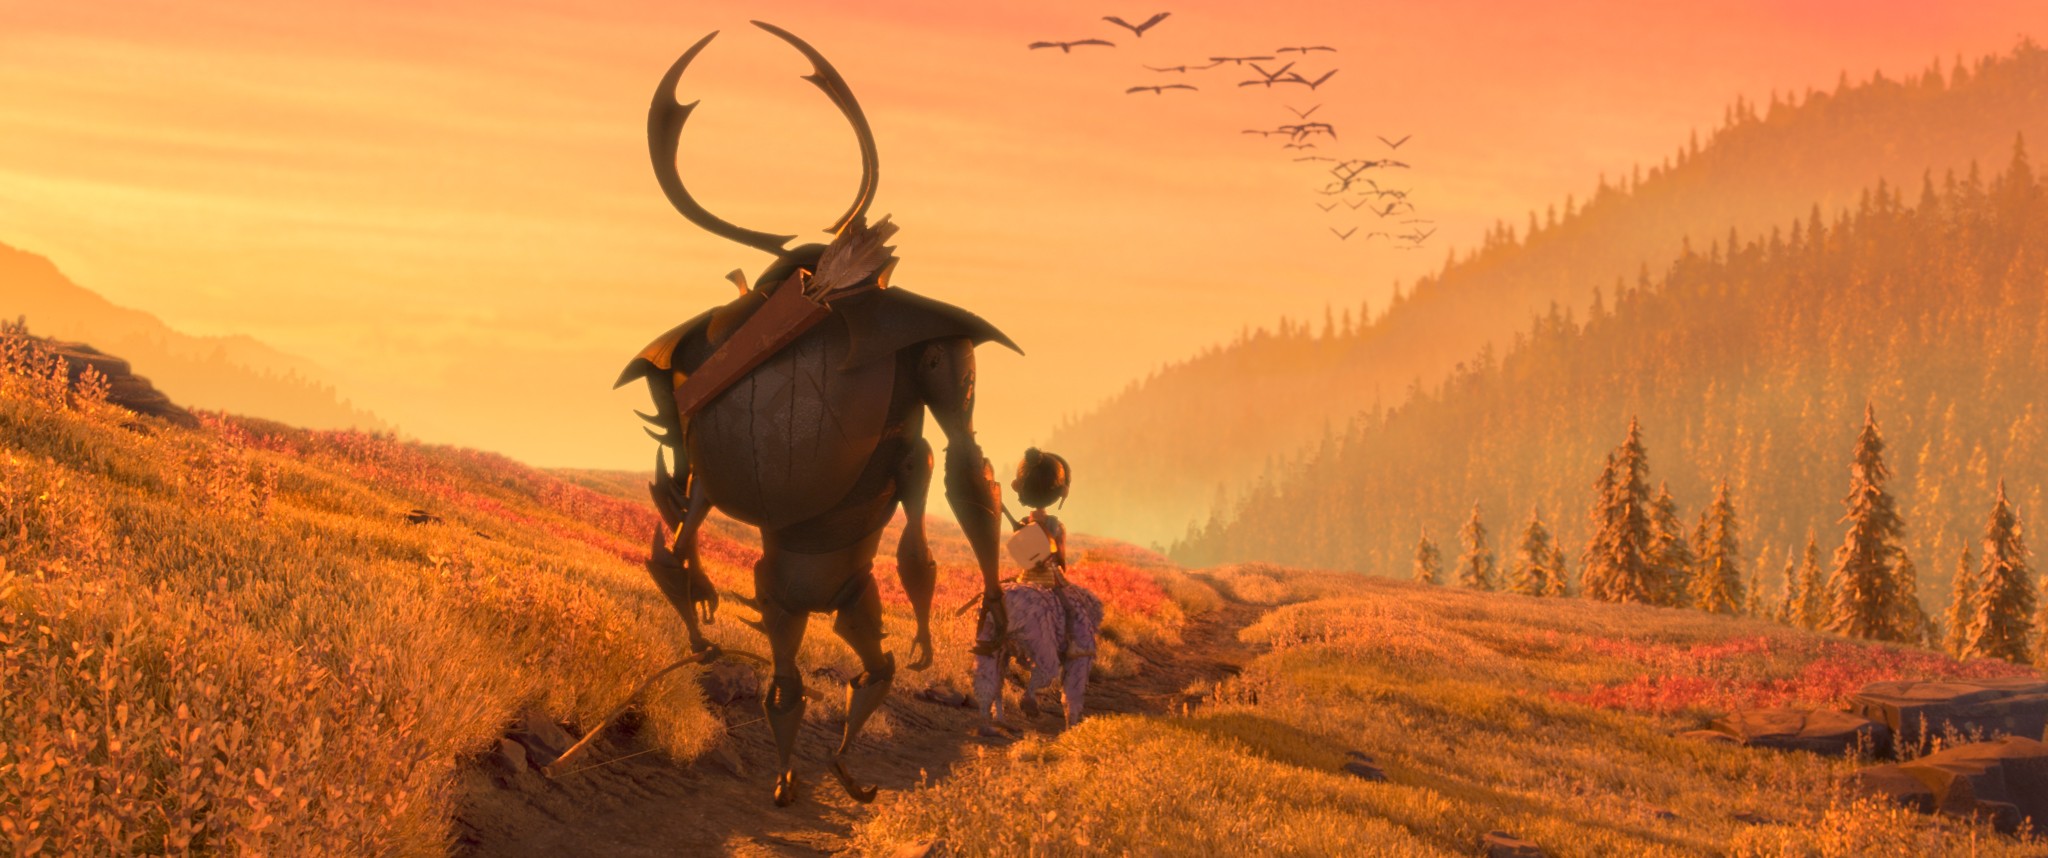 9. 'Kubo and the Two Strings' (2016)